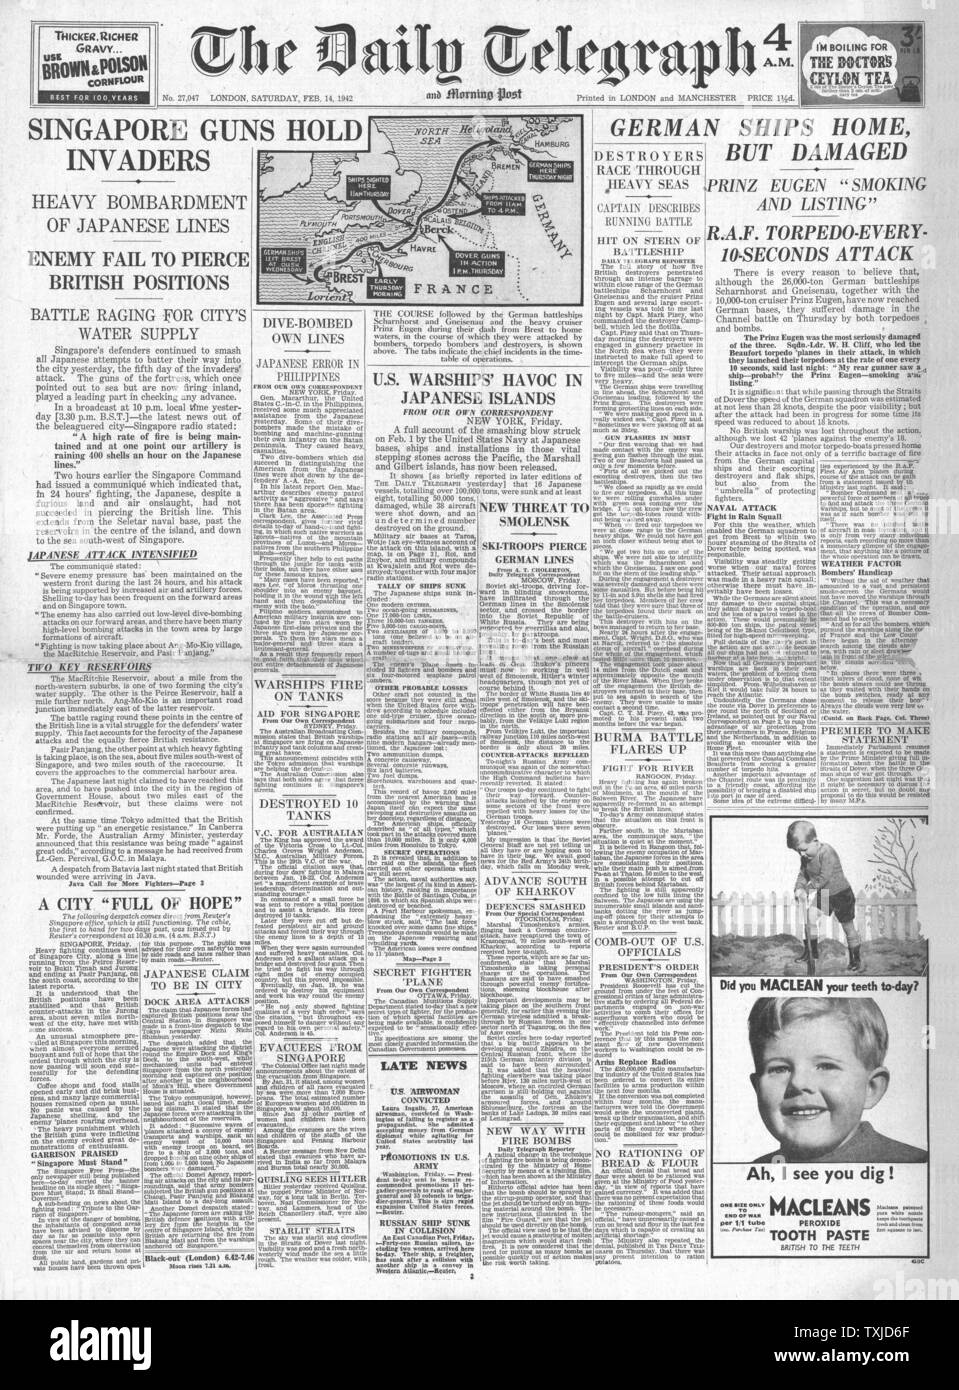 1942 front page Daily Telegraph Battle of Singapore and Channel dash by German Warships Scharnhorst, Gneisenau and Prinz Eugen Stock Photo